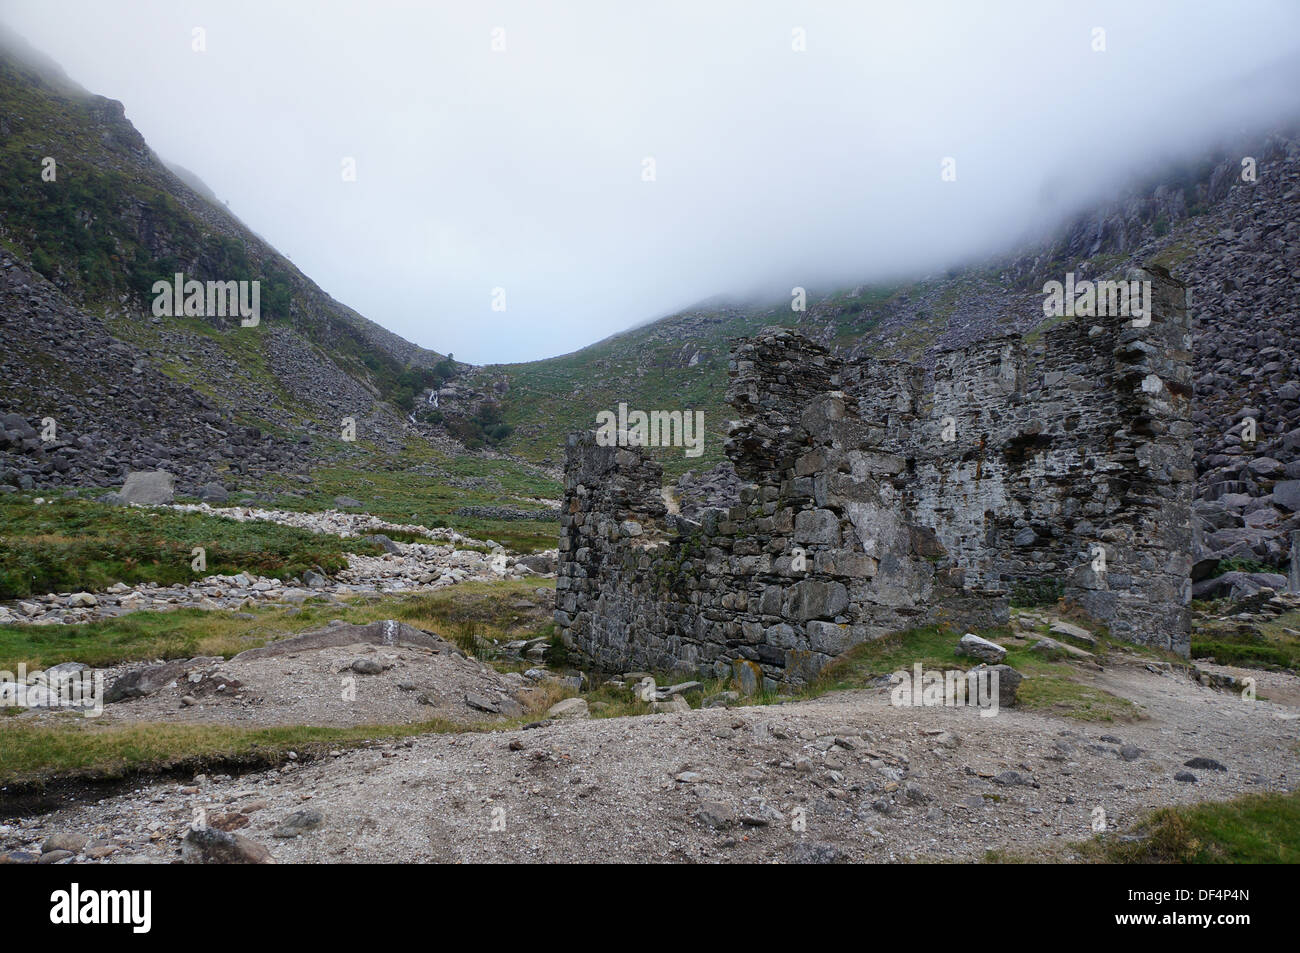 Old lead mining settlement in Glendalough, Ireland. Now a beautiful national park and a popular tourist destination. Stock Photo